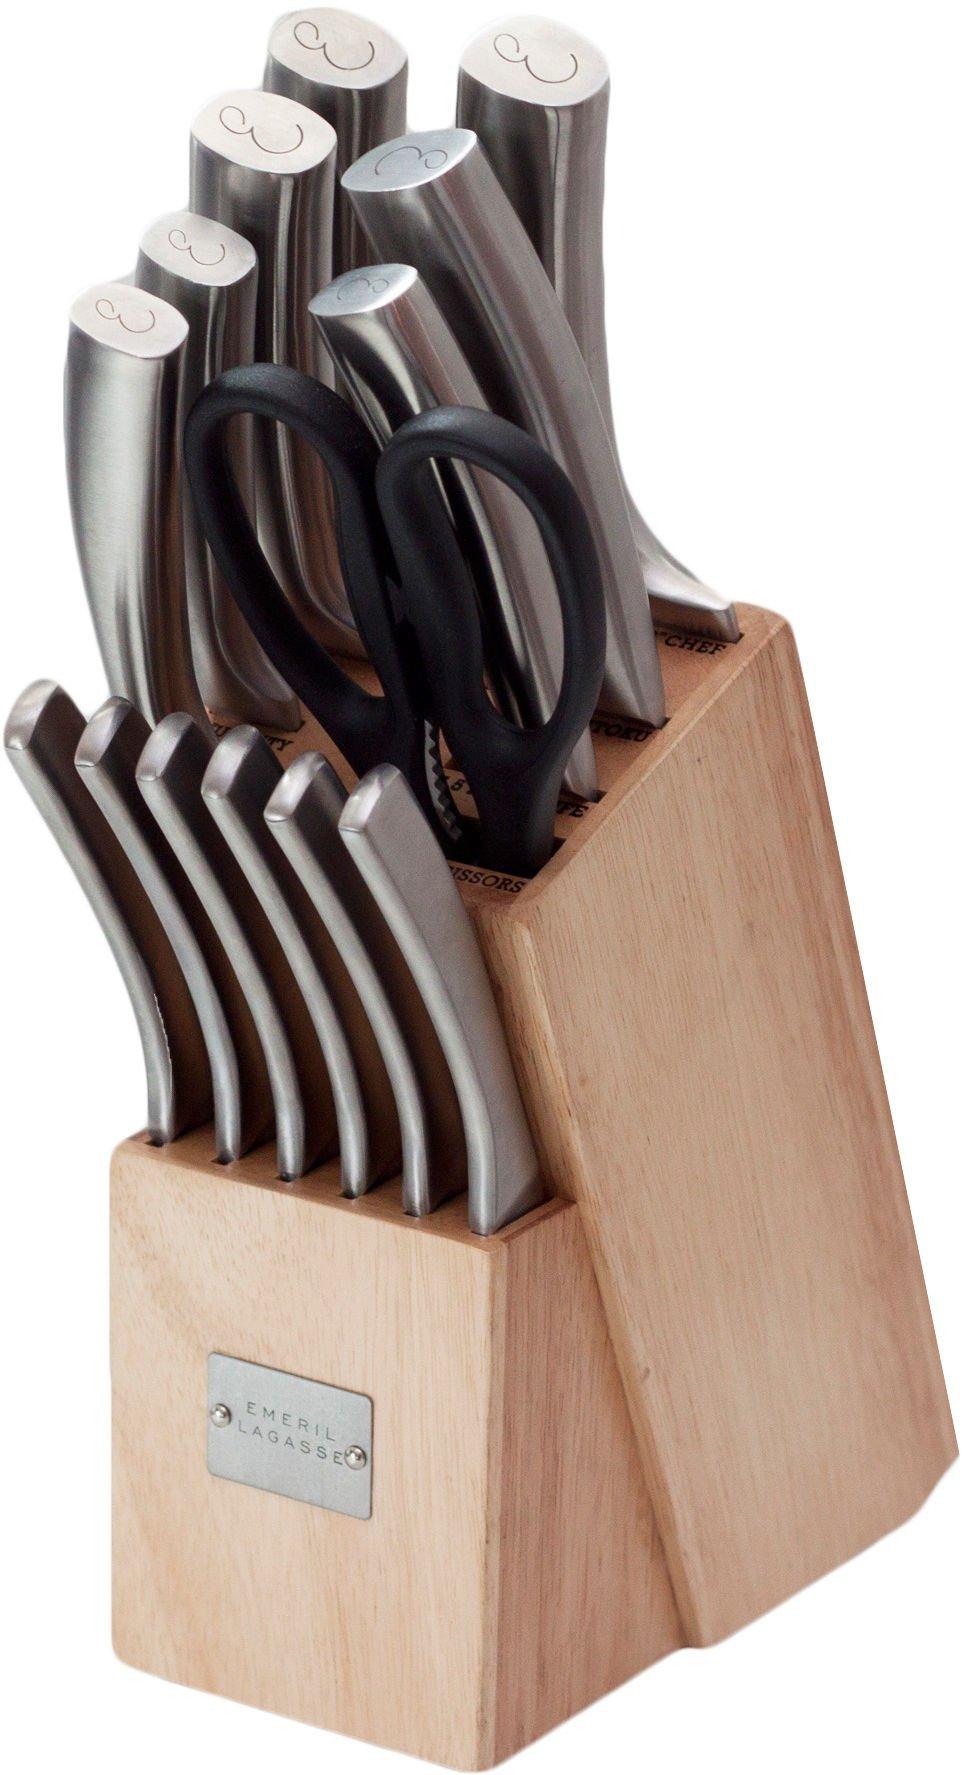 Emeril 9 Pc. Knife Block Set With Forged Handles